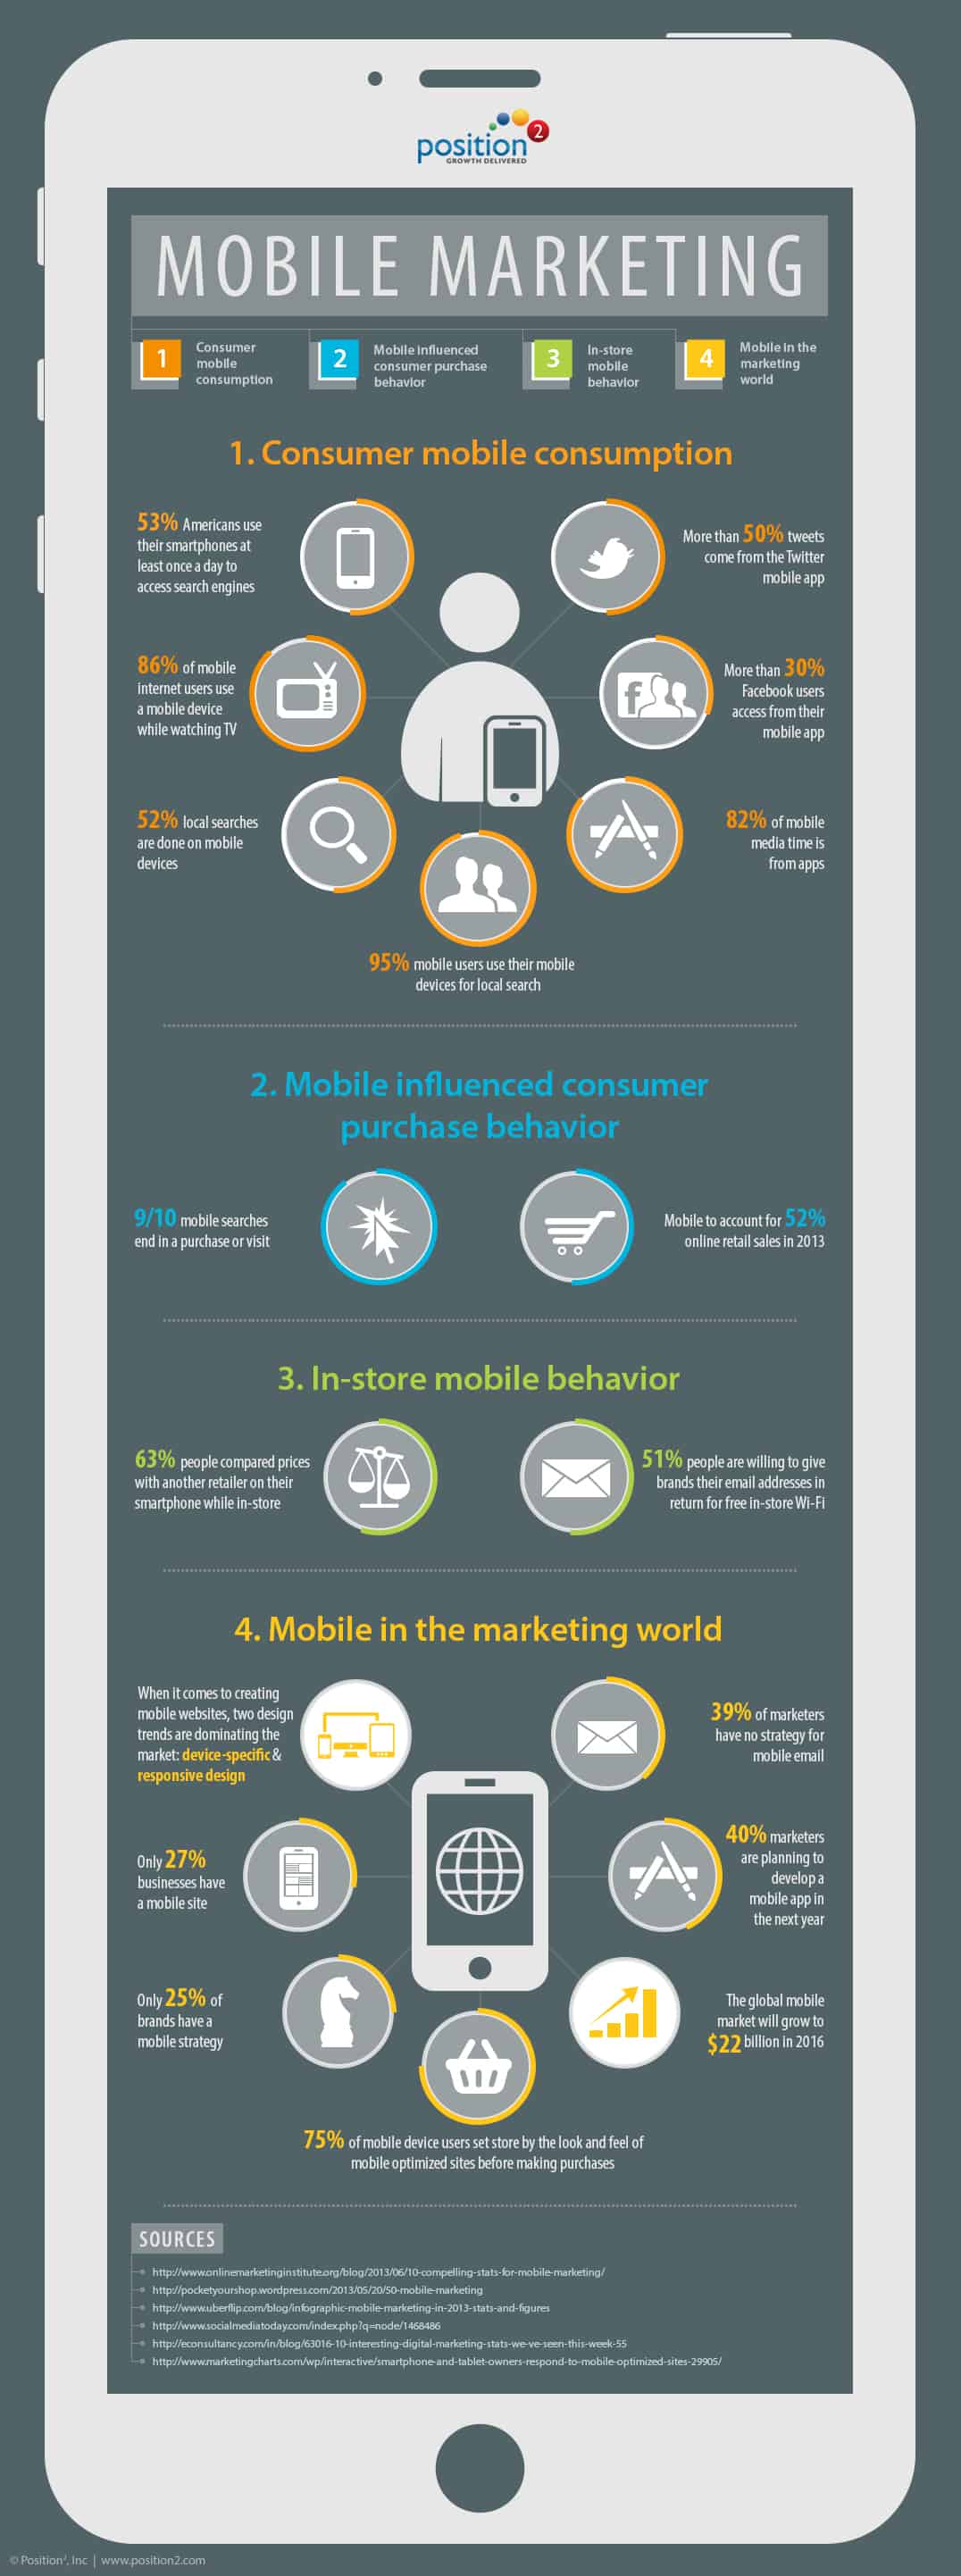 Mobile Stands Tall in the Mrketing World